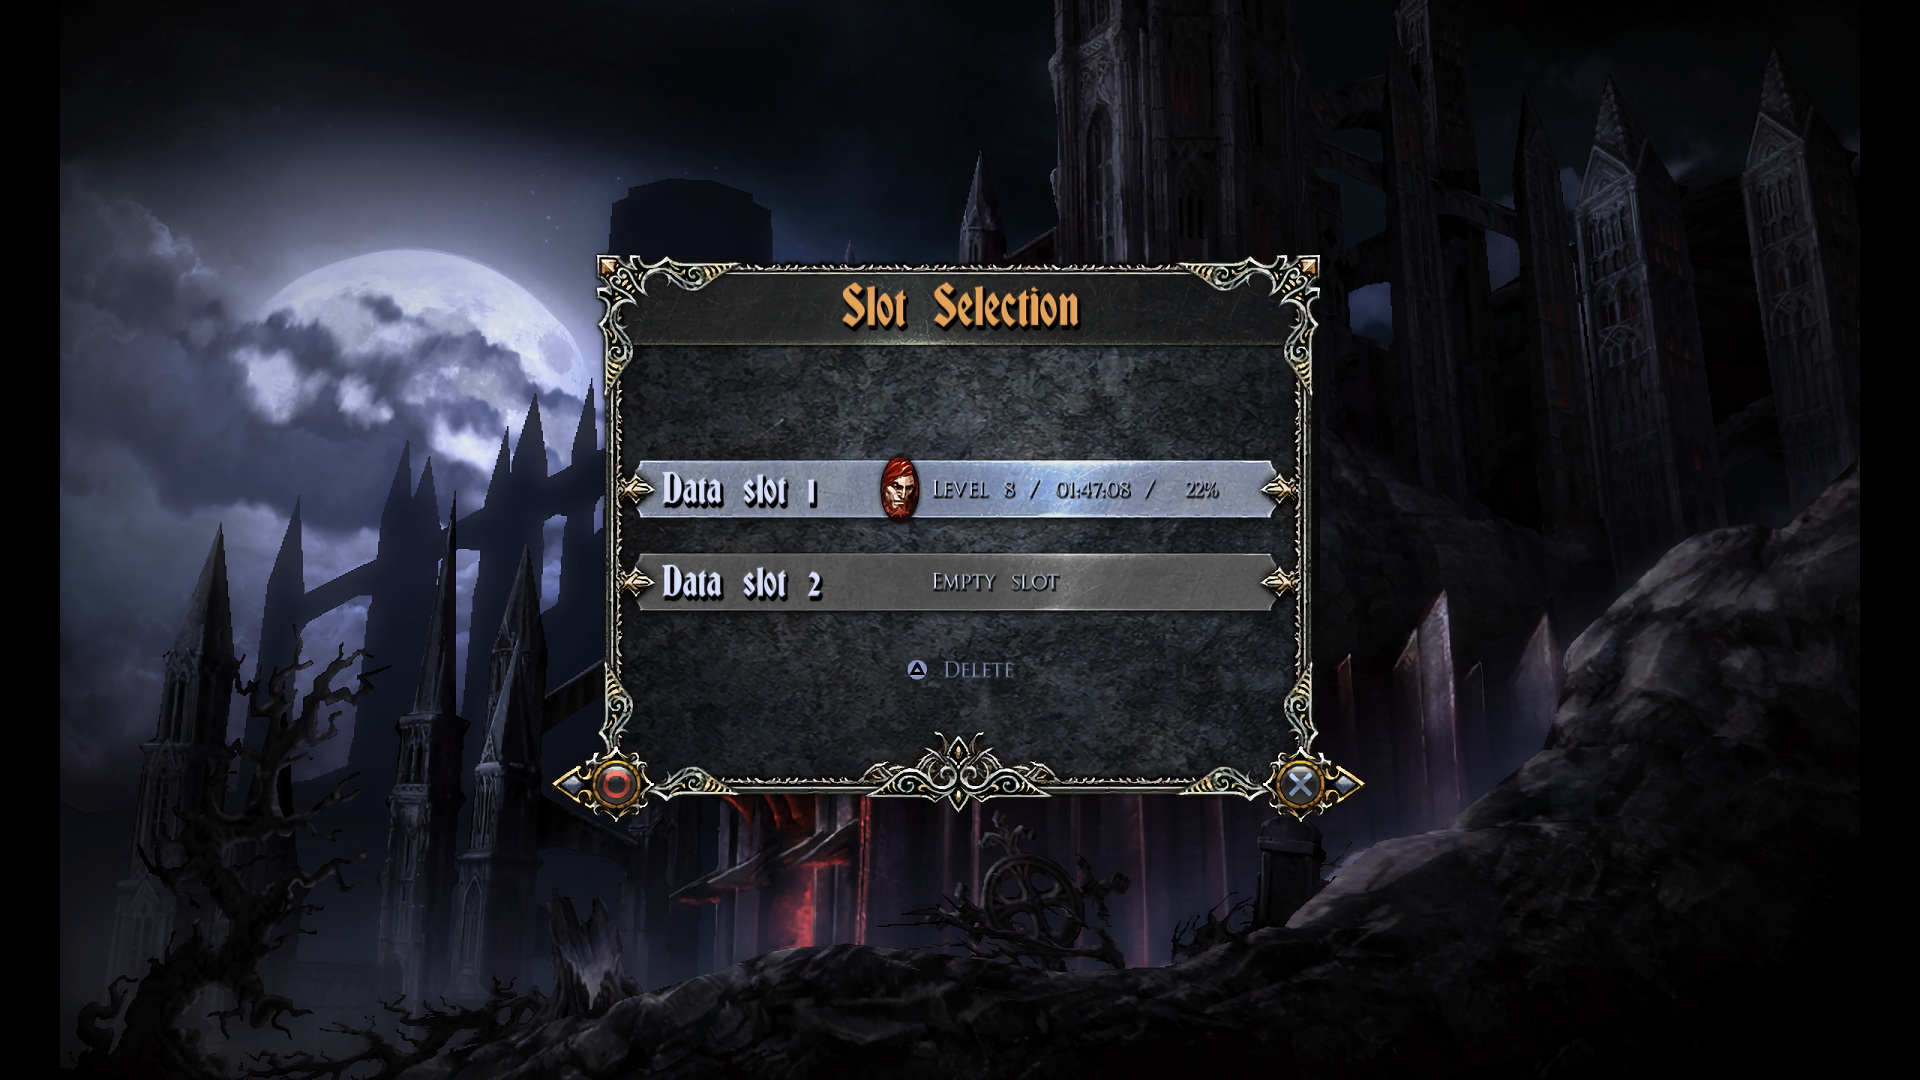 New Castlevania Lords of Shadow screens